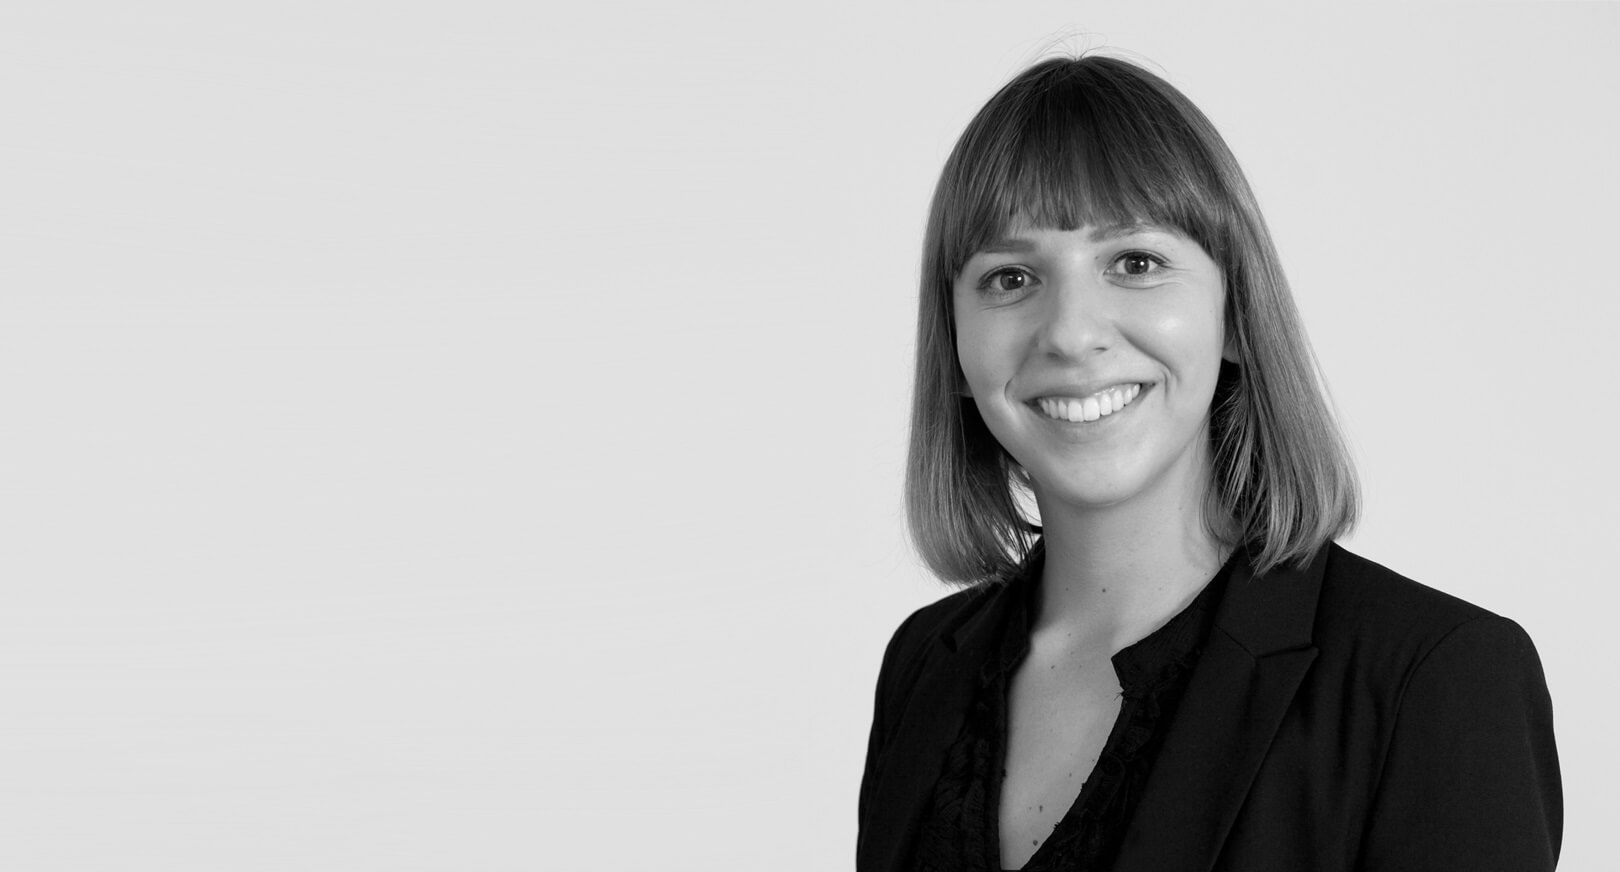 Aleksandra Traczyk writes for HRZone giving a step by step guide to employment law changes we can see following Brexit